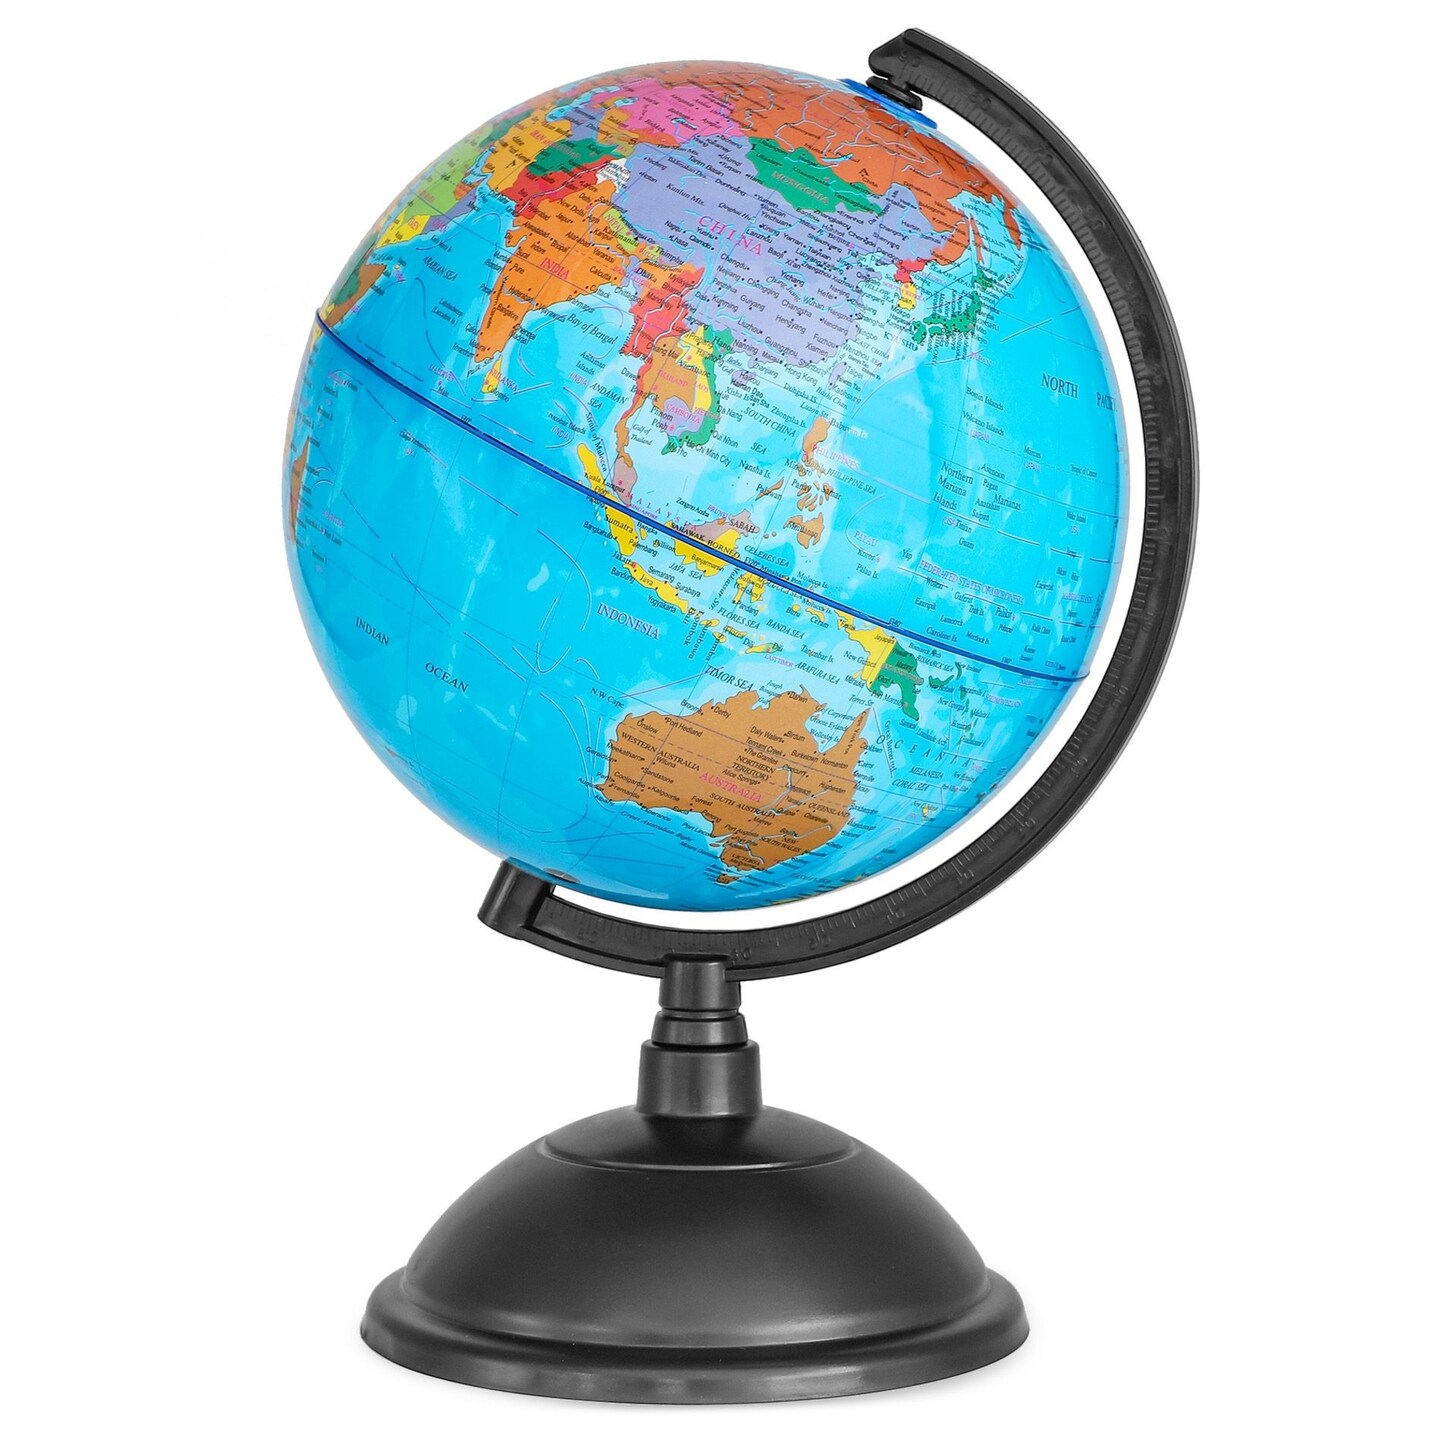 Rotating World Globe with Stand for Kids Learning, 8-inch Spinning Earth Globe for Classroom Geography Education